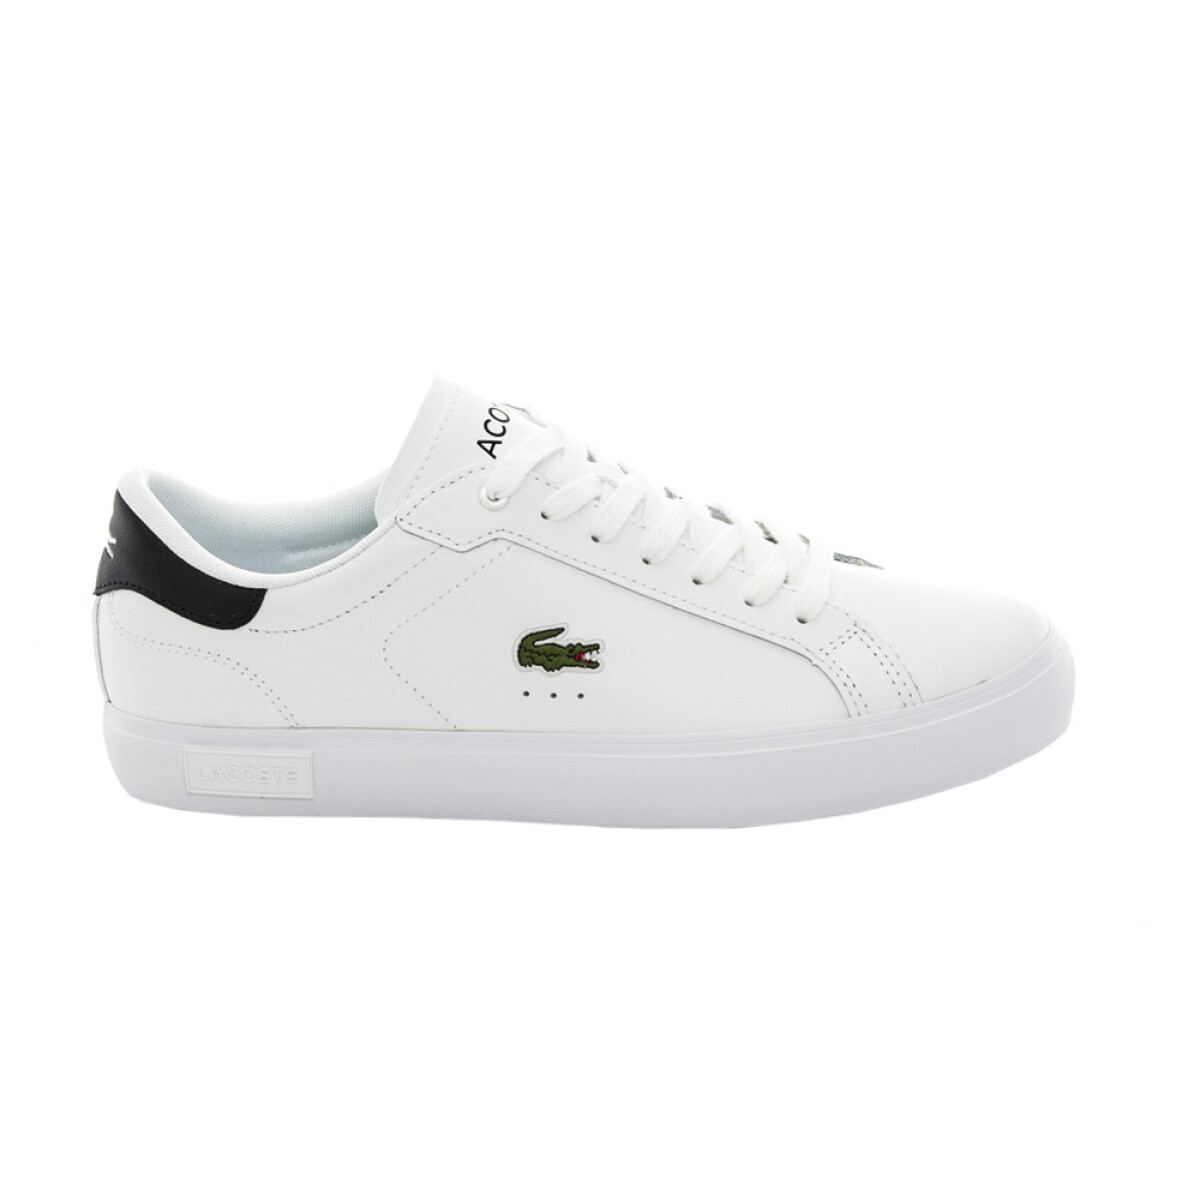 Lacoste Powercourt Leather Sneakers - White 